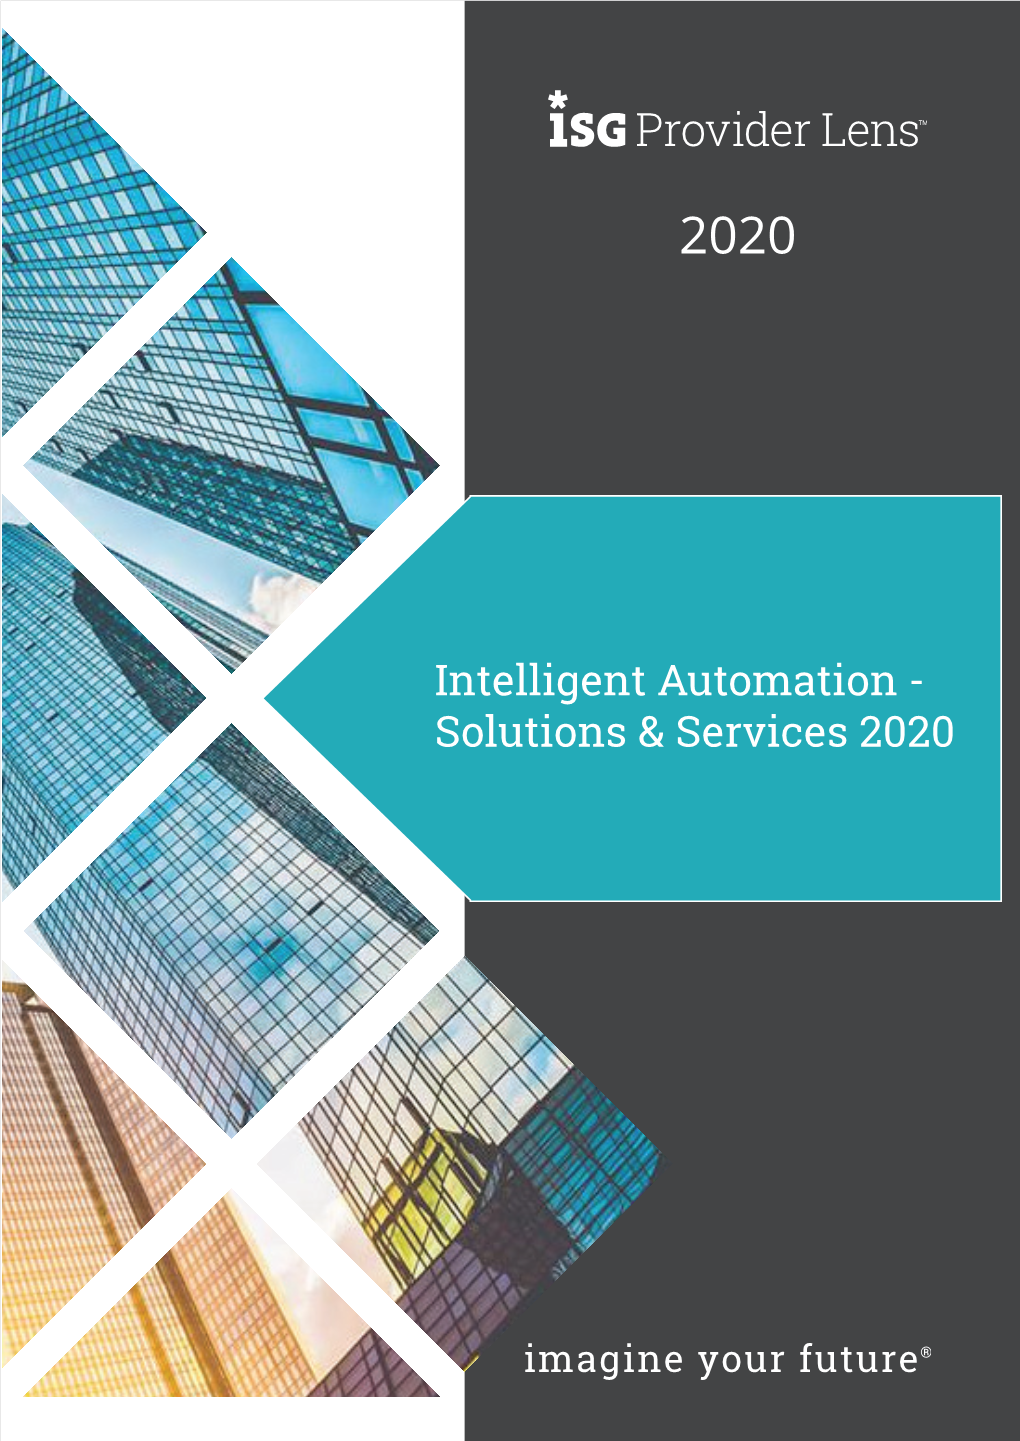 Intelligent Automation - Solutions & Services 2020